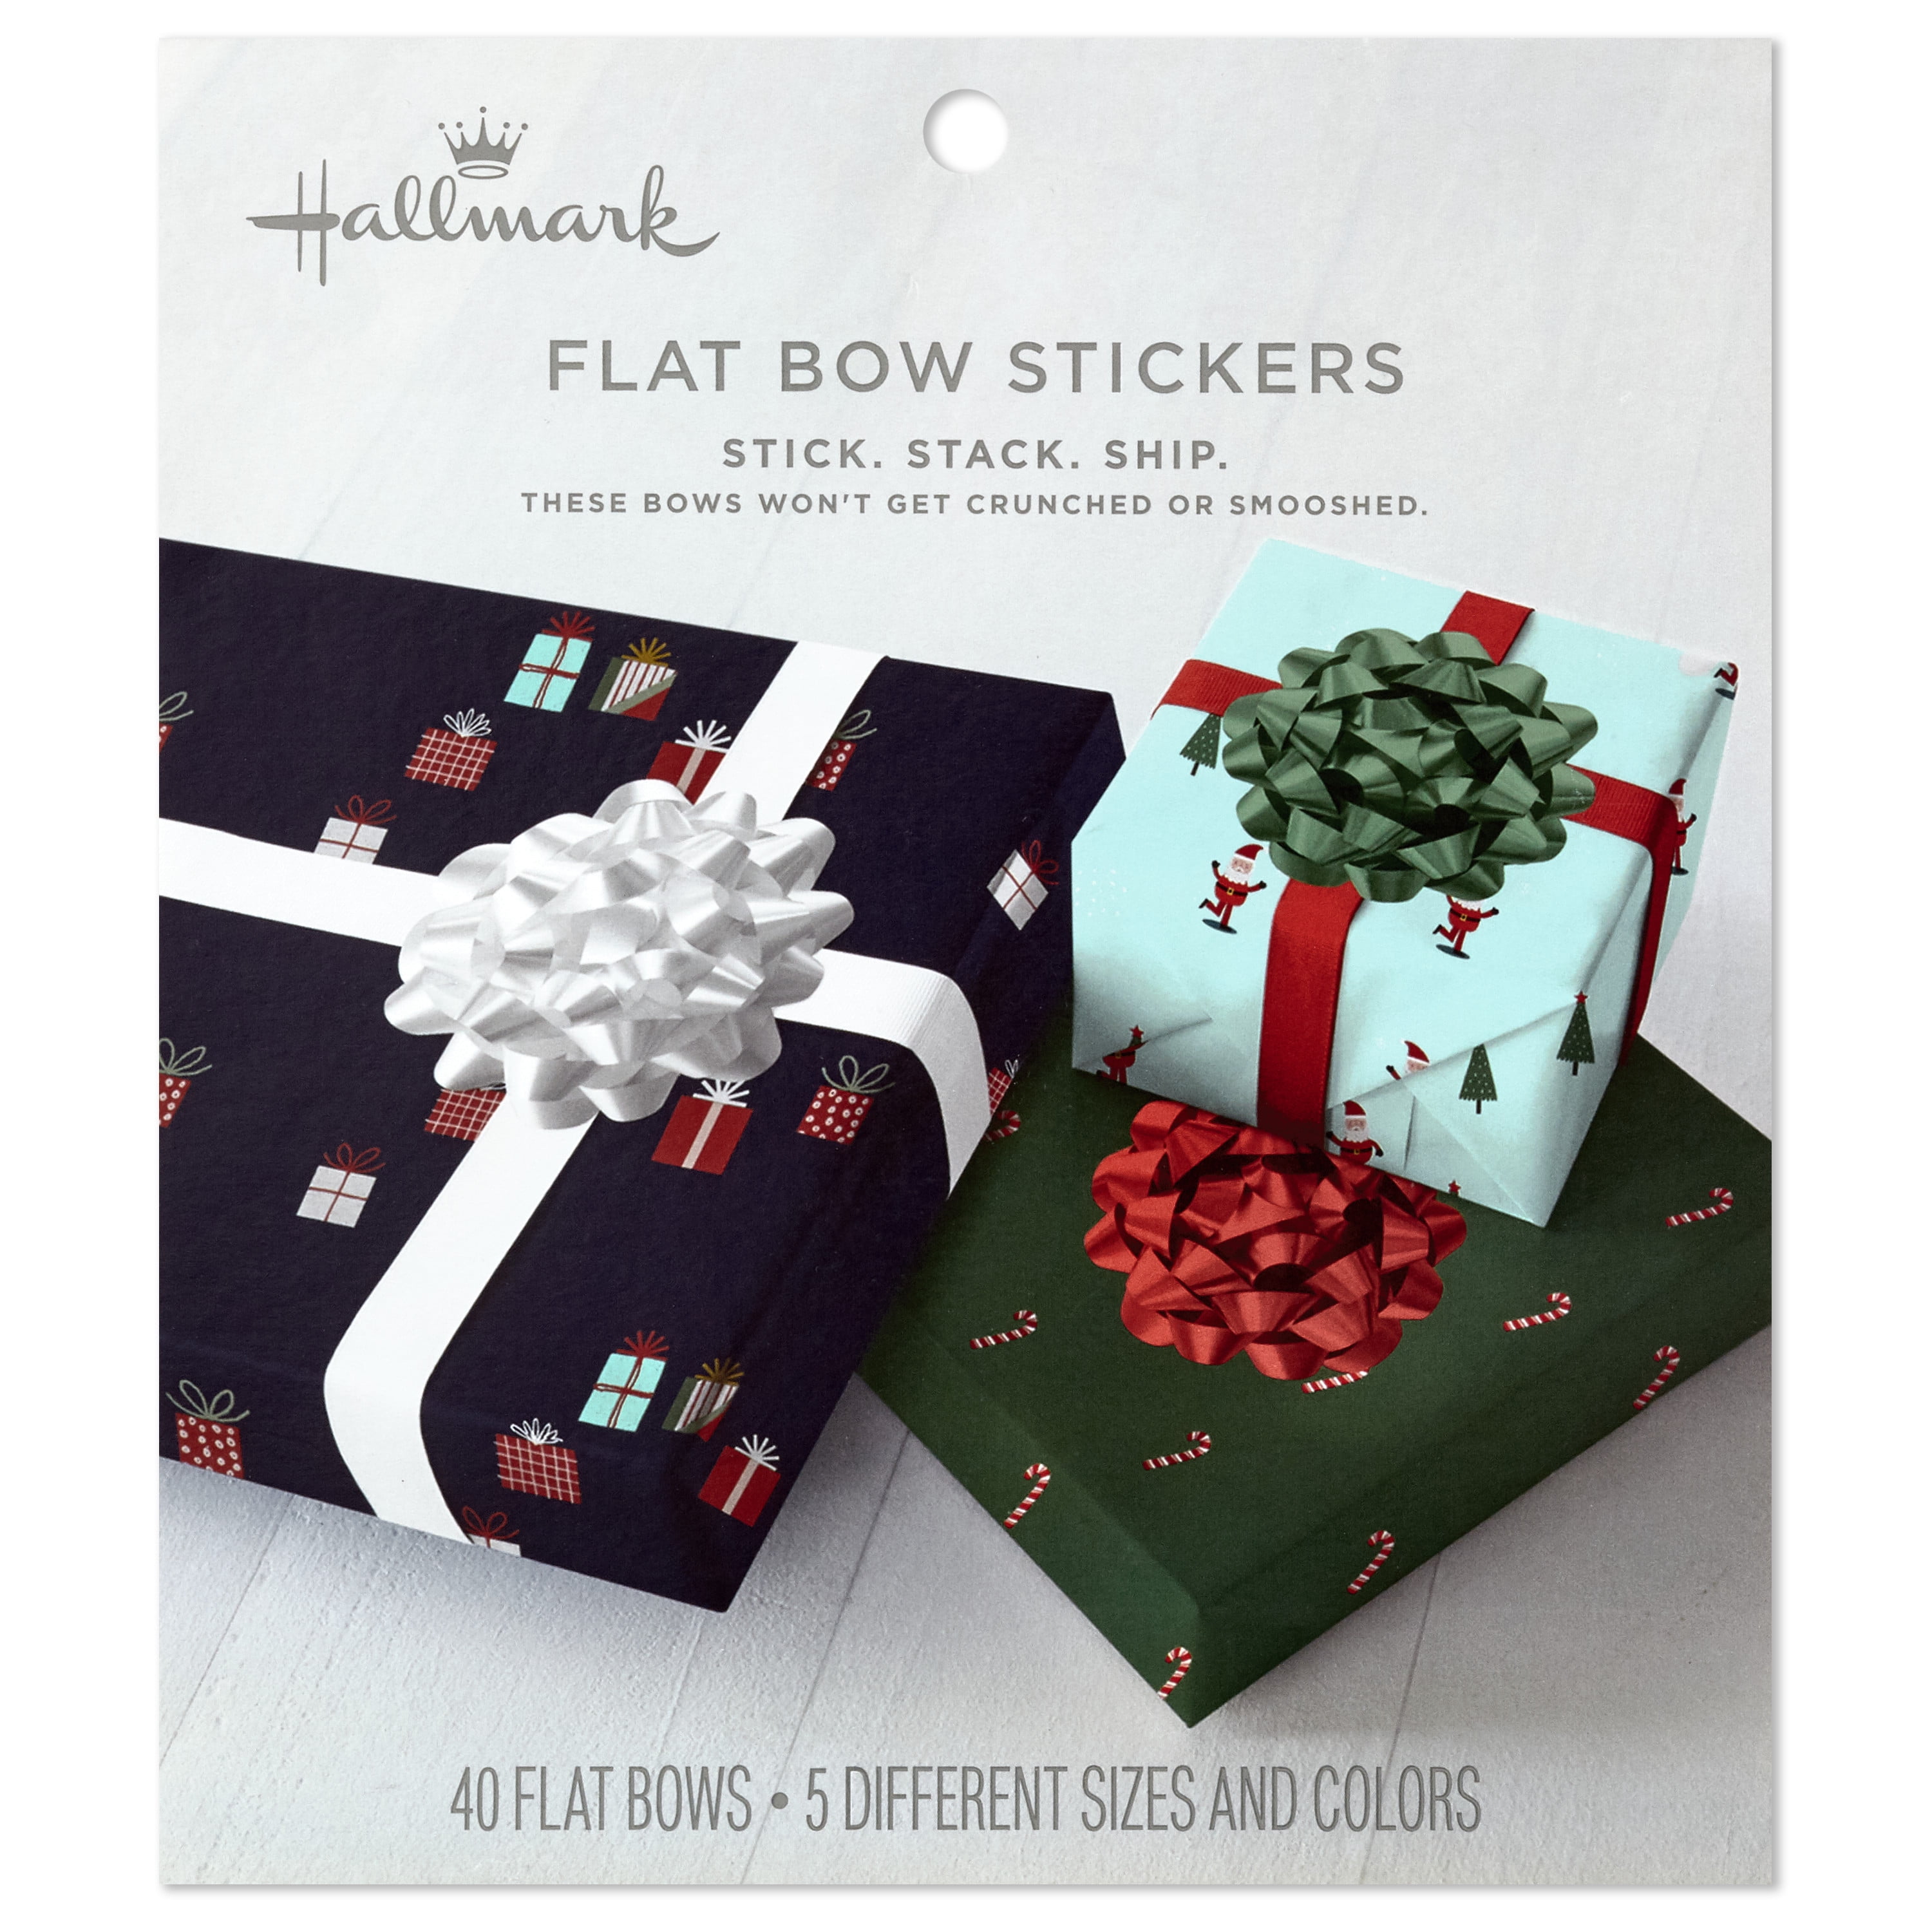 Hallmark Flat Bow Stickers (5 sheets, 40 Stickers) 